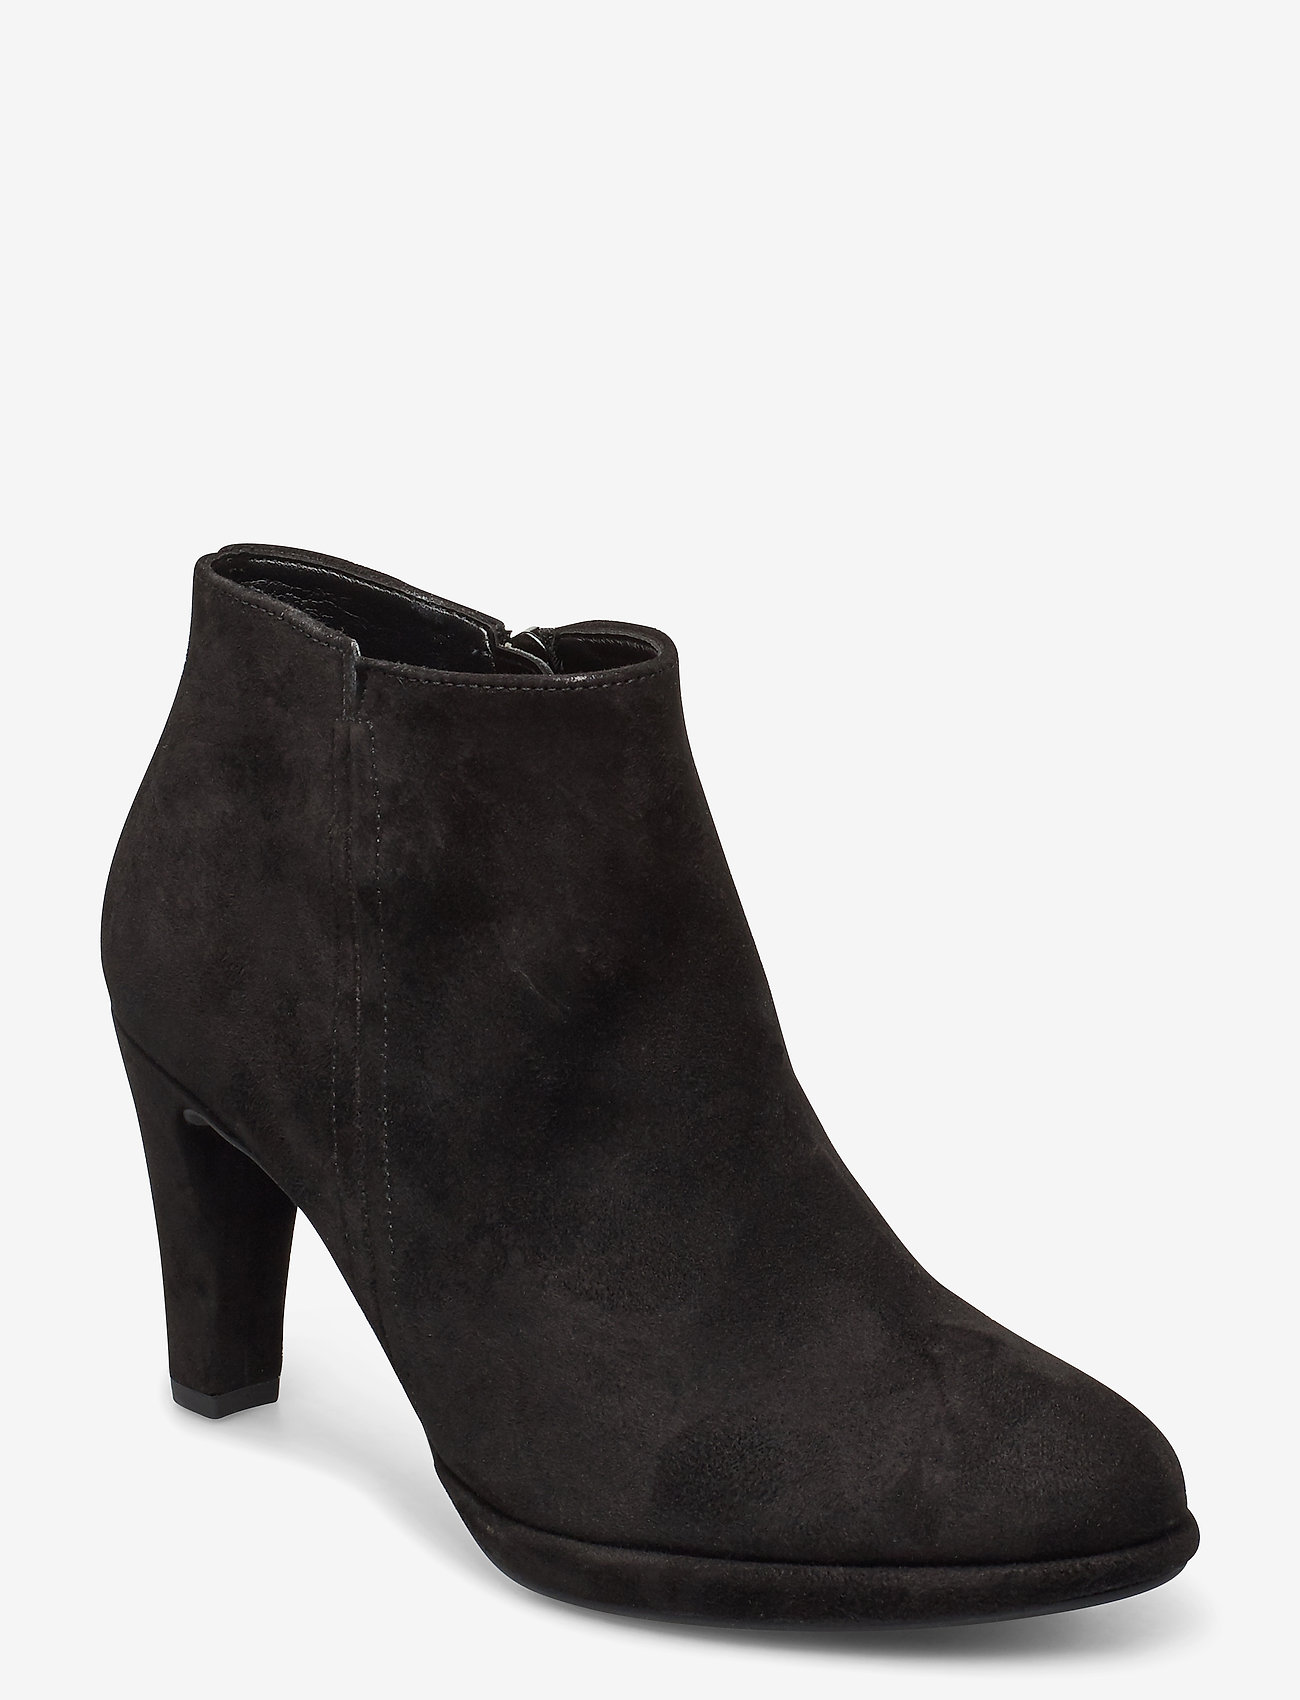 gabor black suede ankle boots